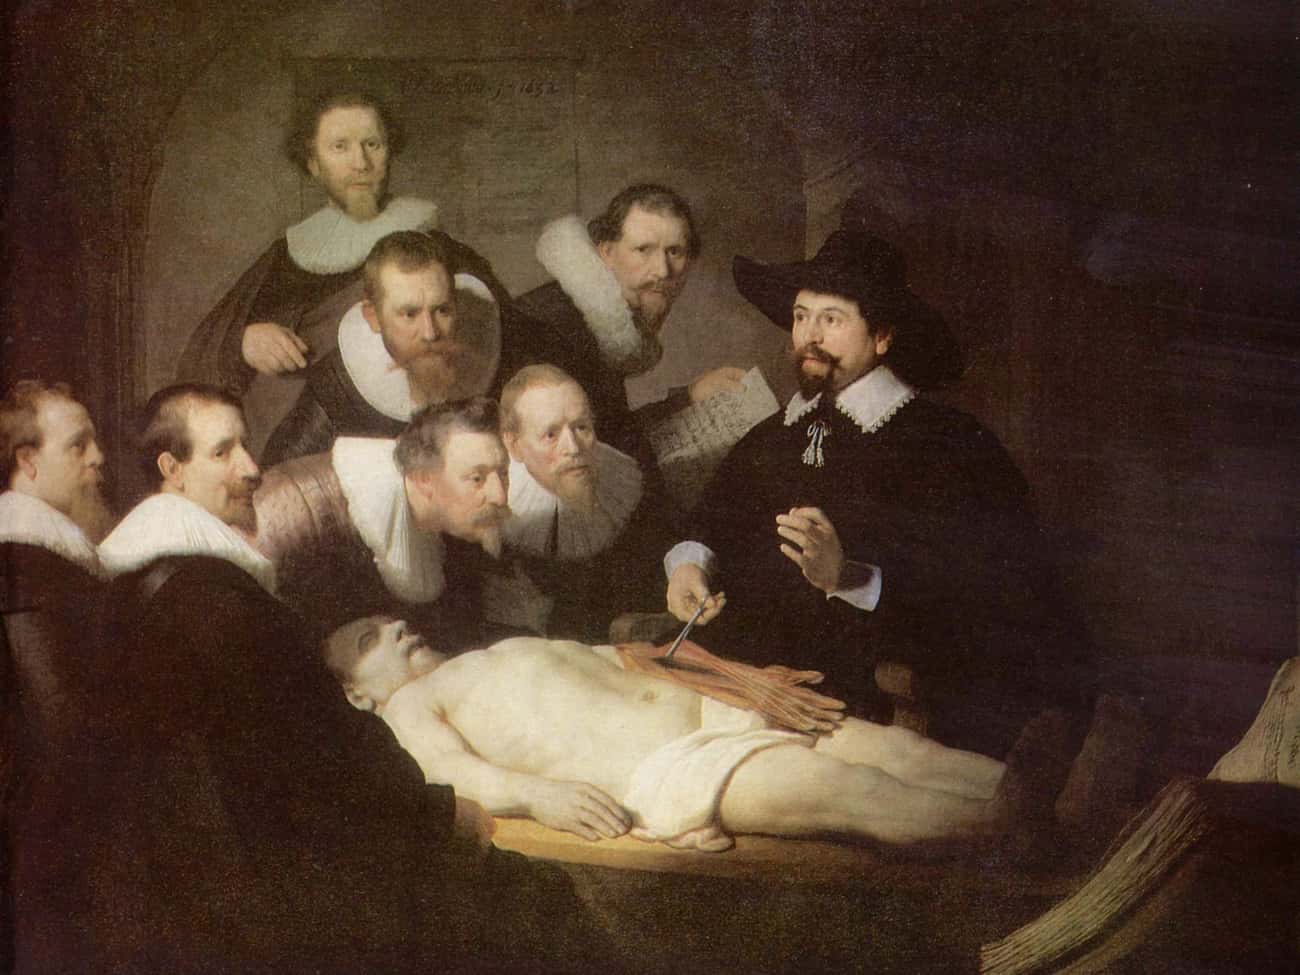 The Anatomy Lesson of Dr. Nicolaes Tulp